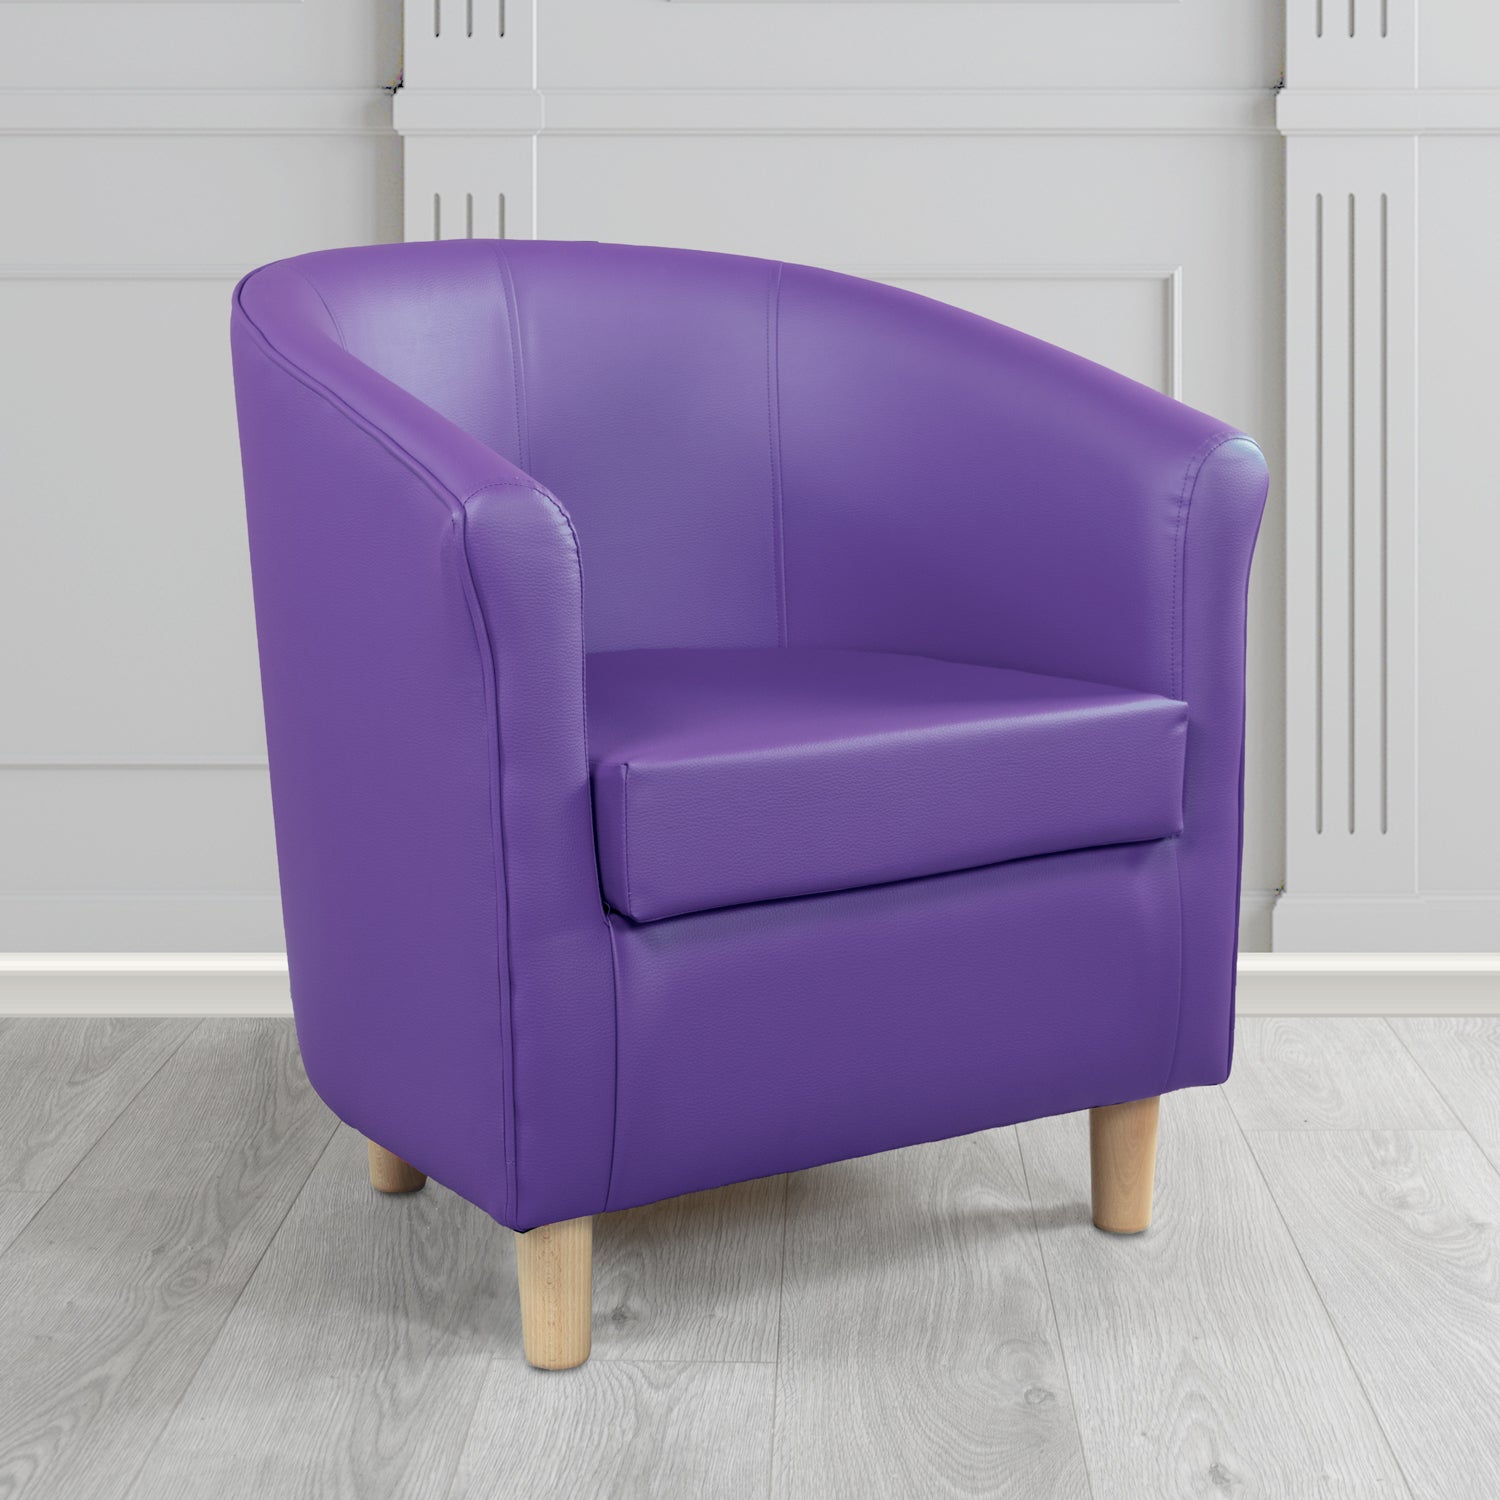 Tuscany Just Colour Ultraviolet Antimicrobial Crib 5 Contract Faux Leather Tub Chair